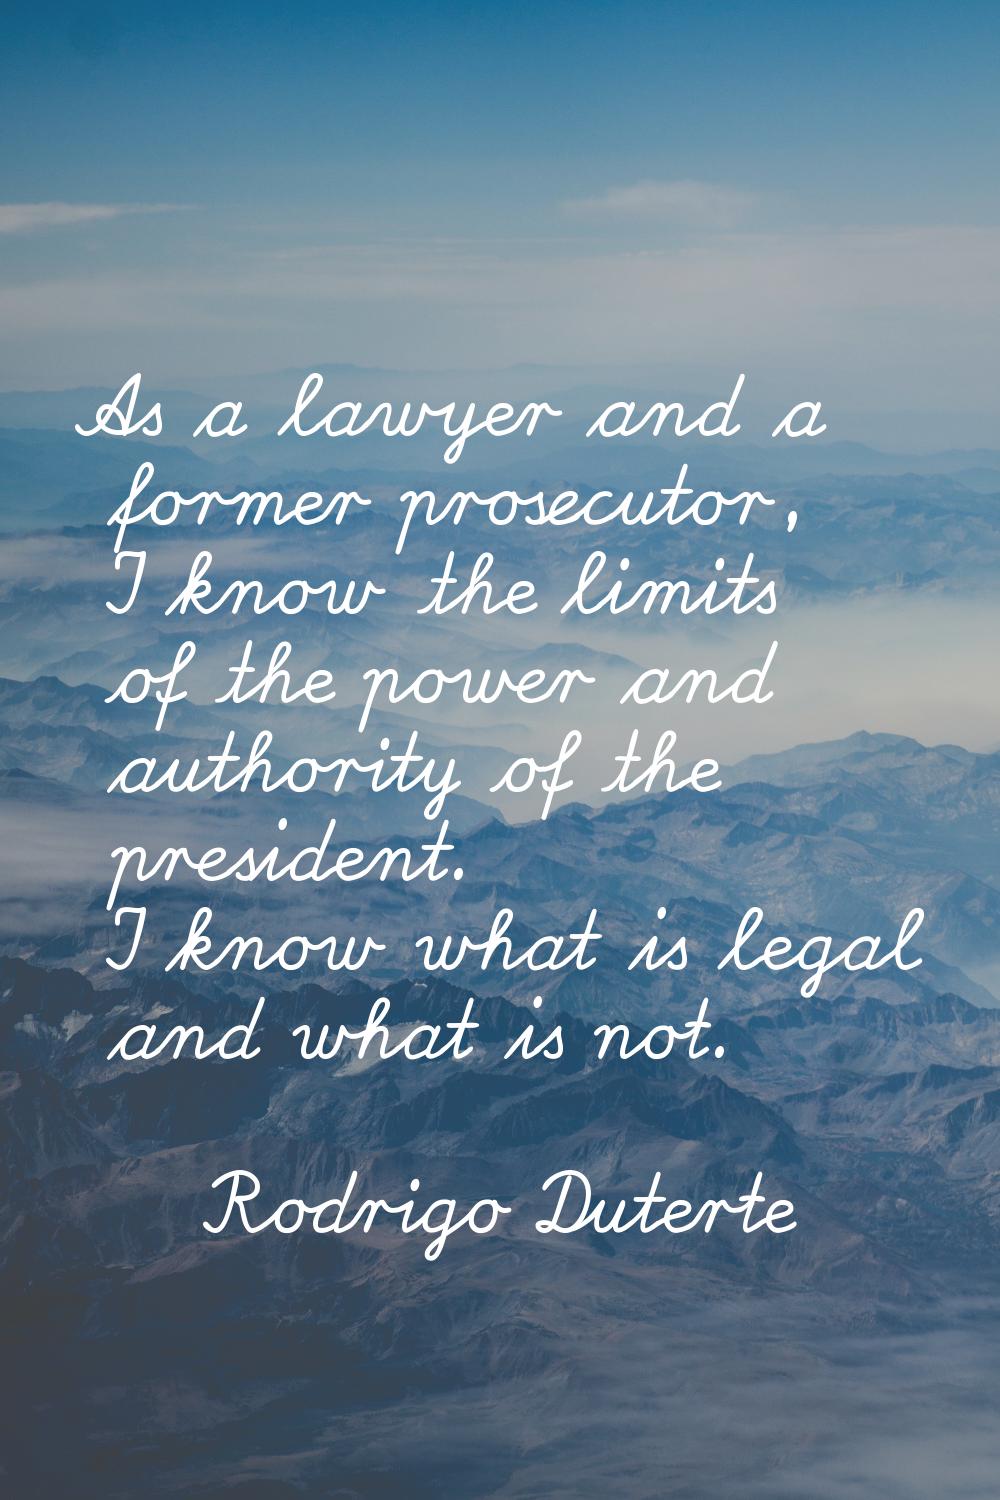 As a lawyer and a former prosecutor, I know the limits of the power and authority of the president.